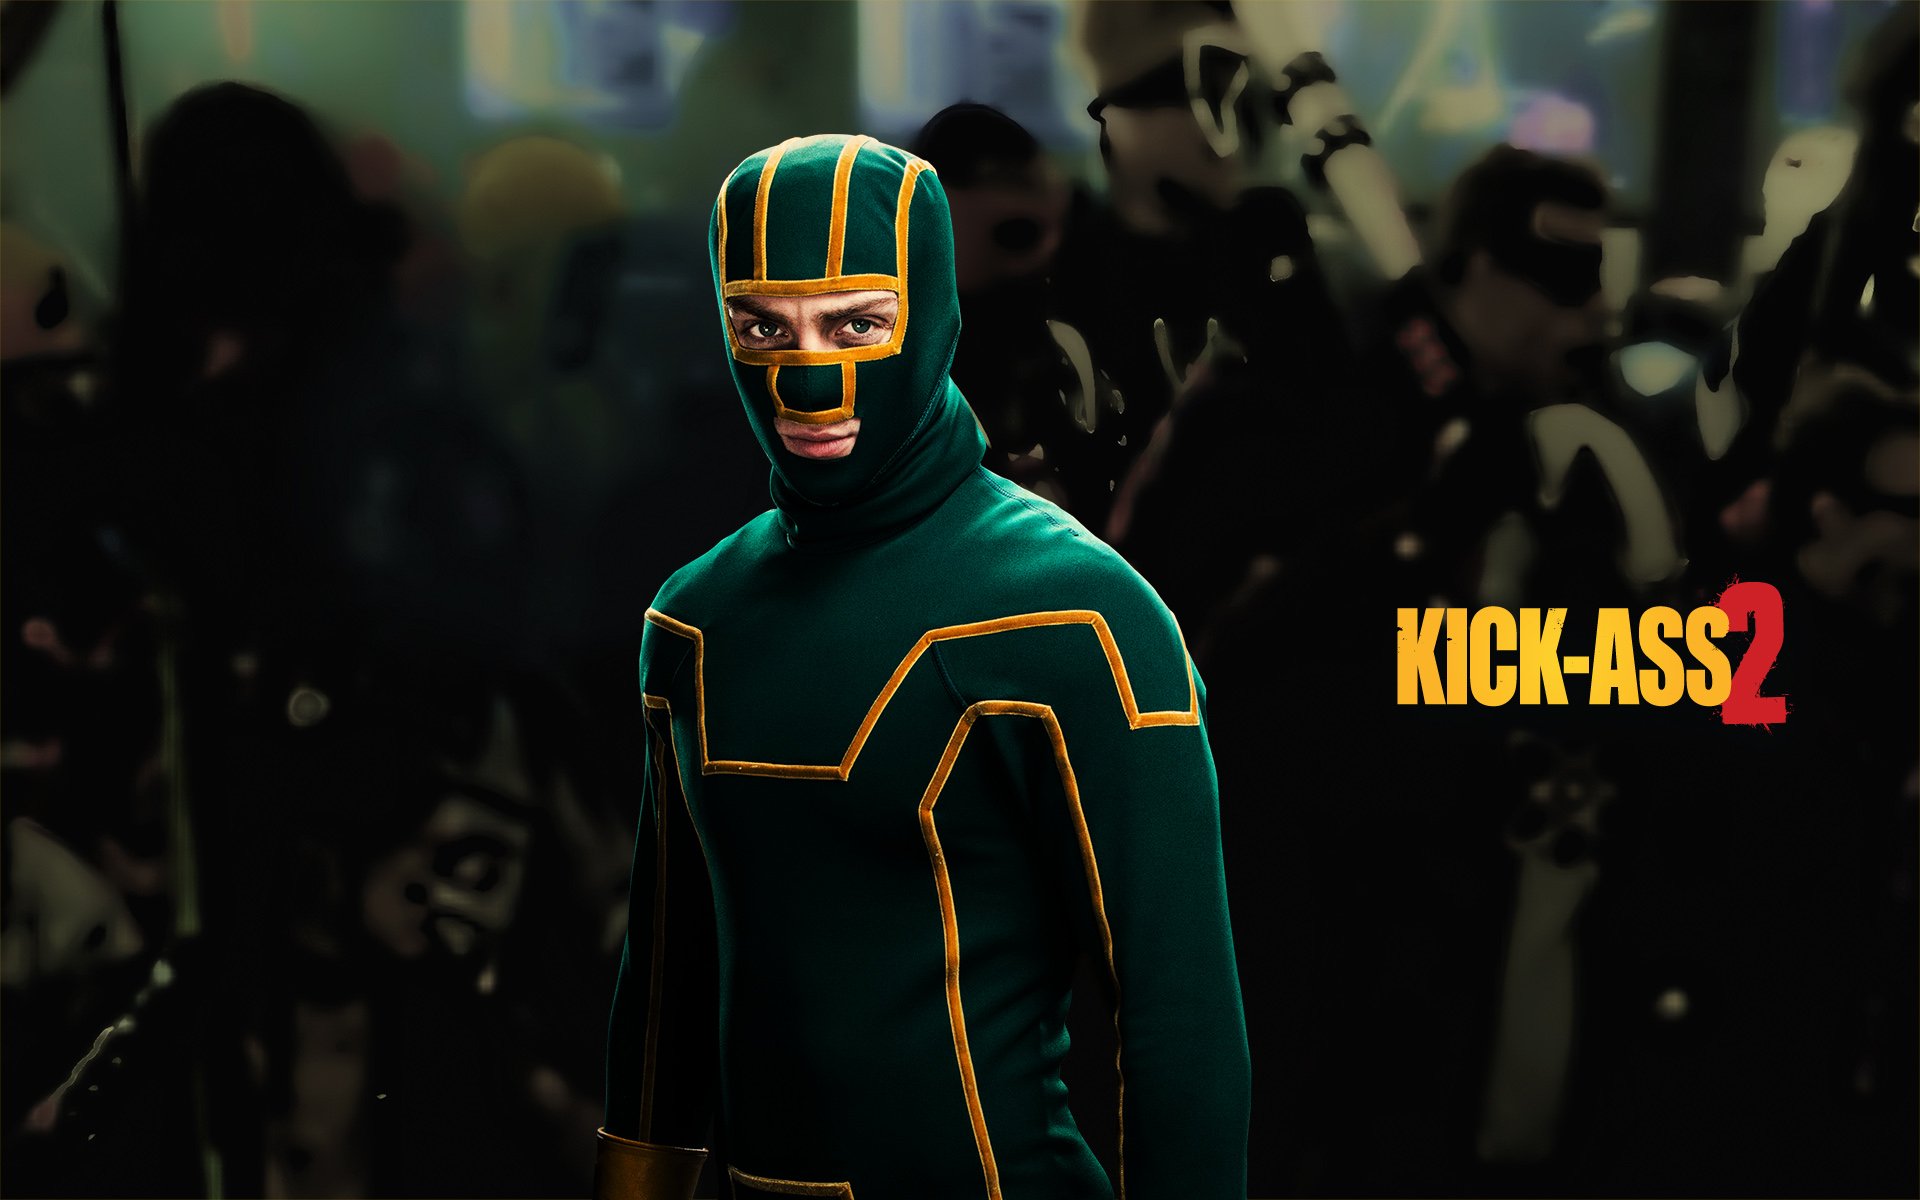 kick full movie online with english subtitles